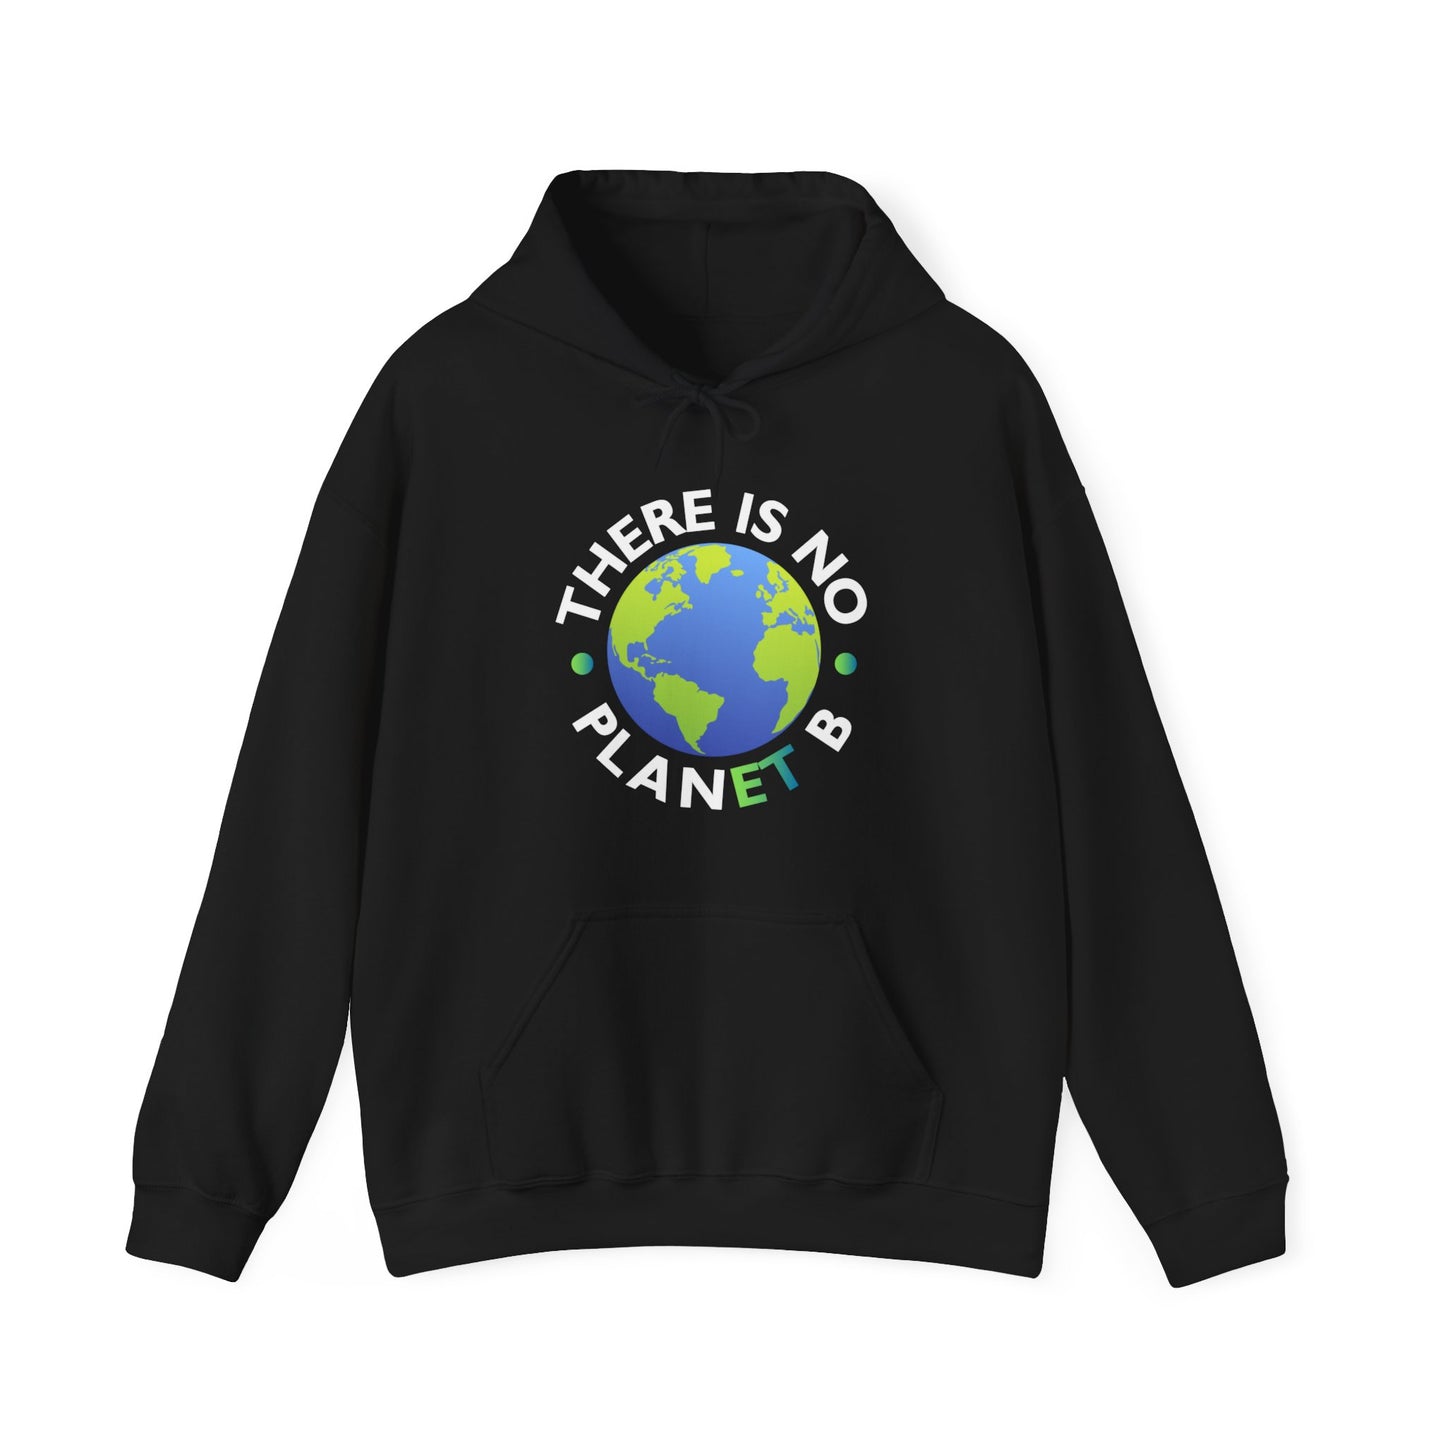 “There Is No Planet B” Unisex Hoodie